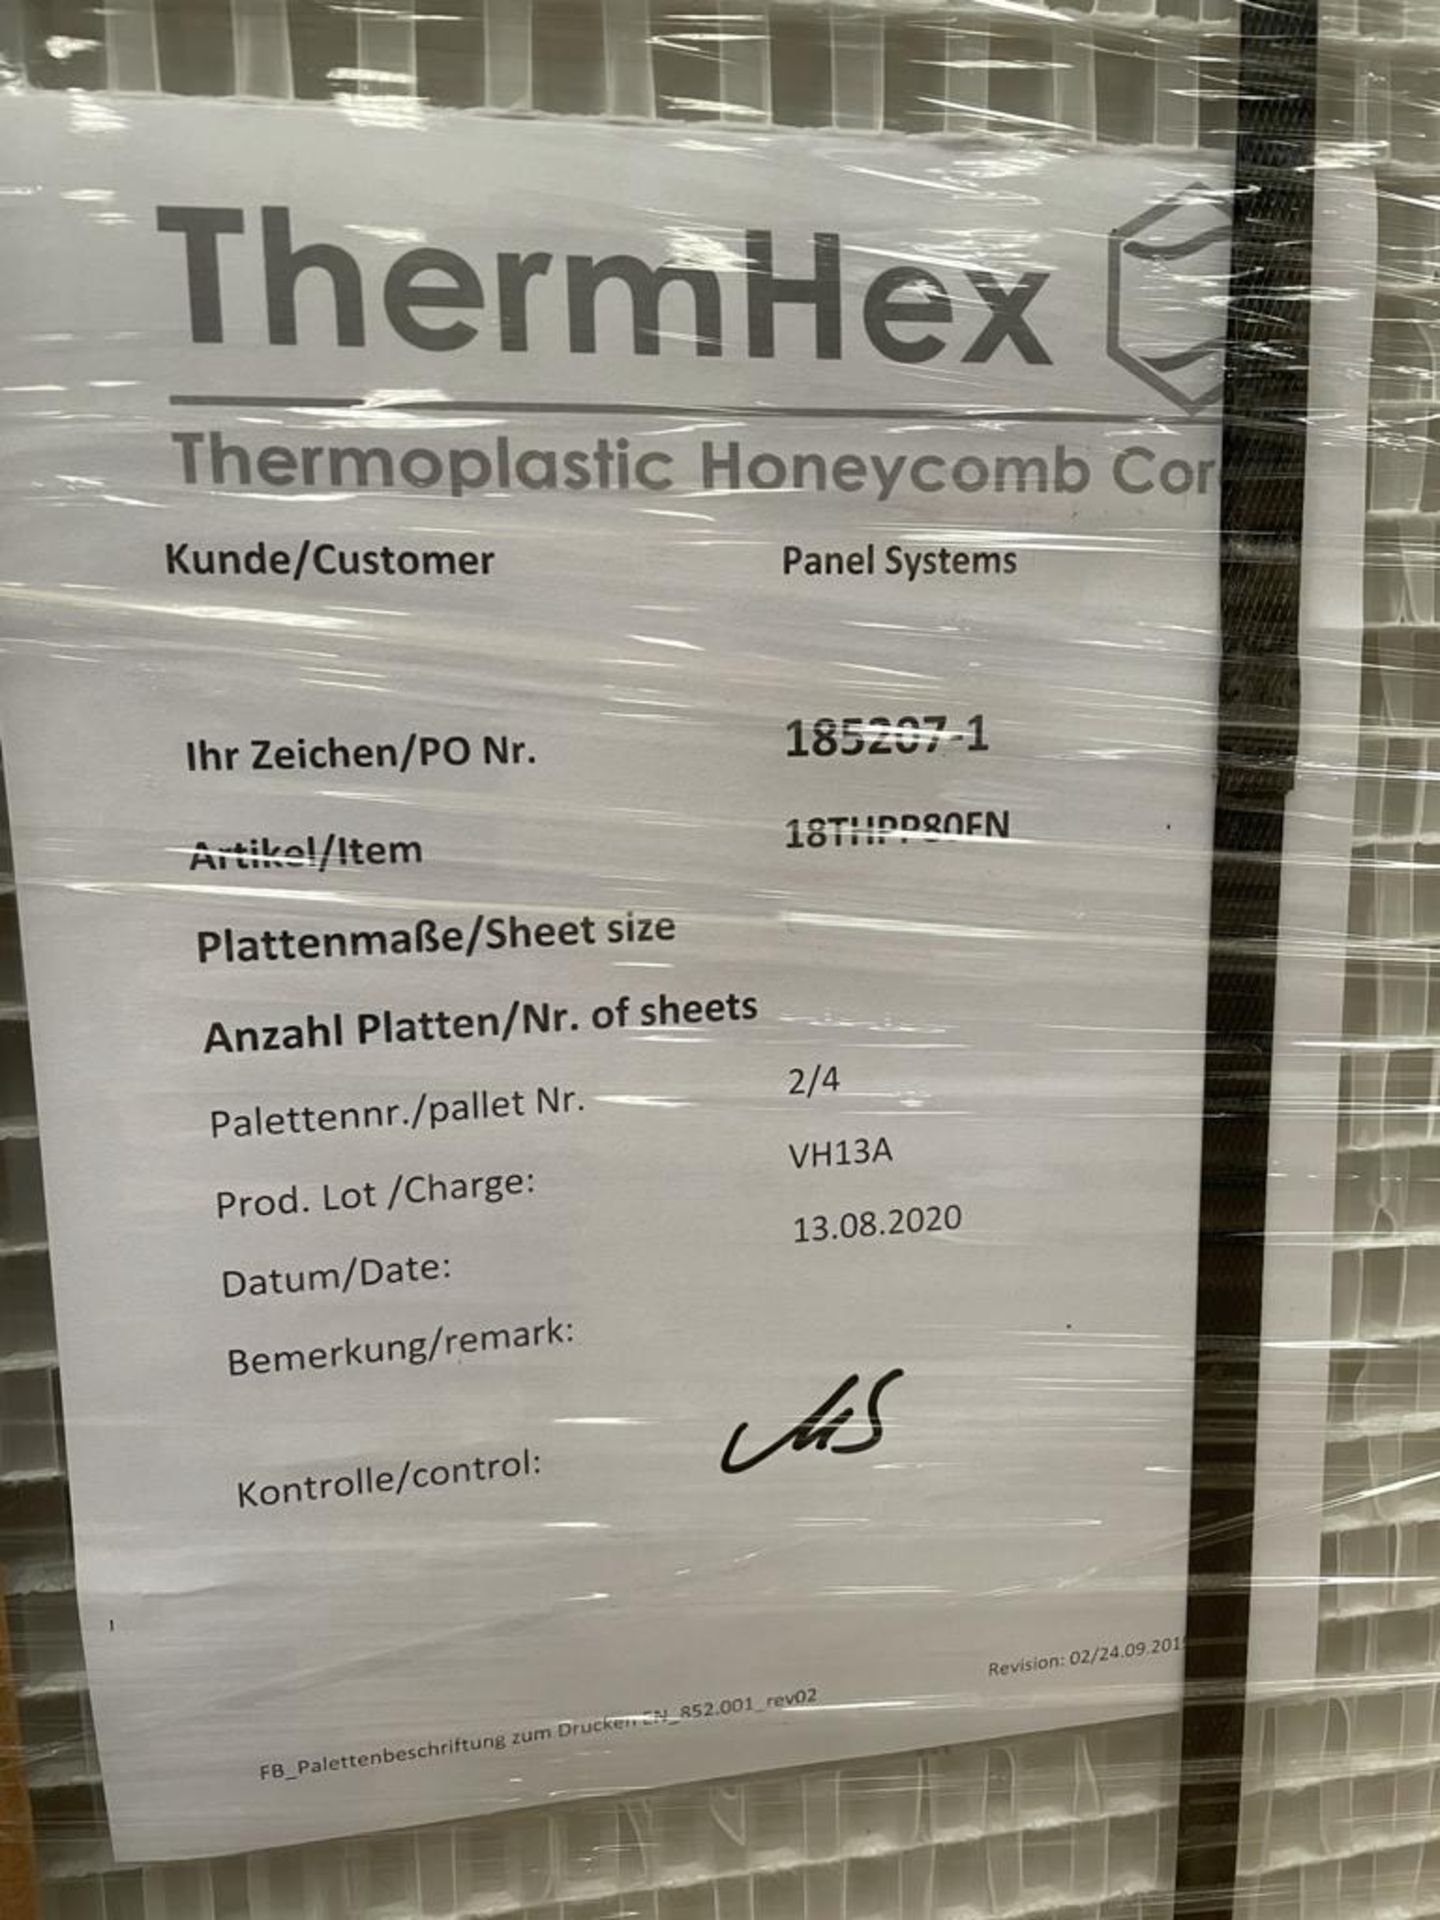 6 x ThermHex Thermoplastic Honeycomb Core Panels - Size 693 x 1210 x 18mm - New Stock - - Image 7 of 8